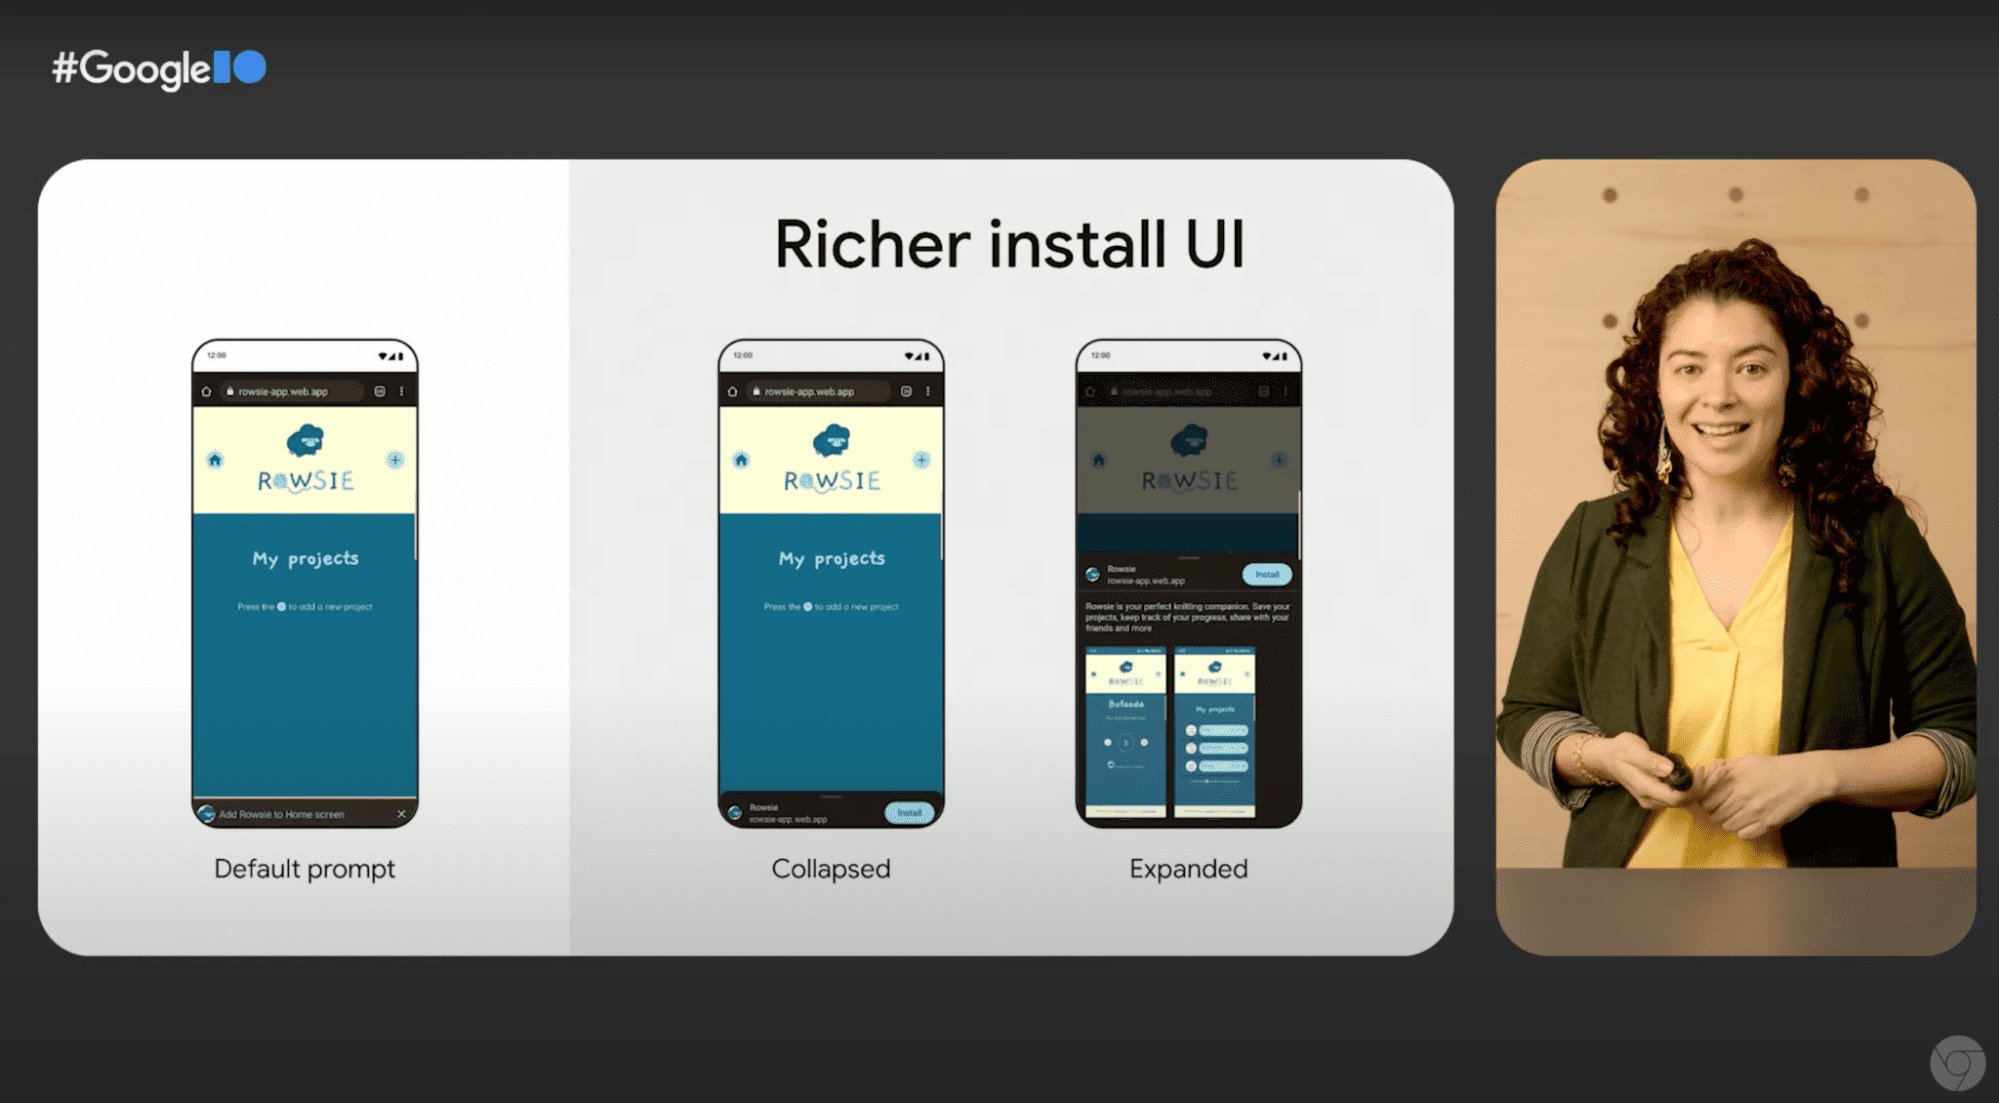 A still from a talk with the speaker showing examples of a richer install UI.